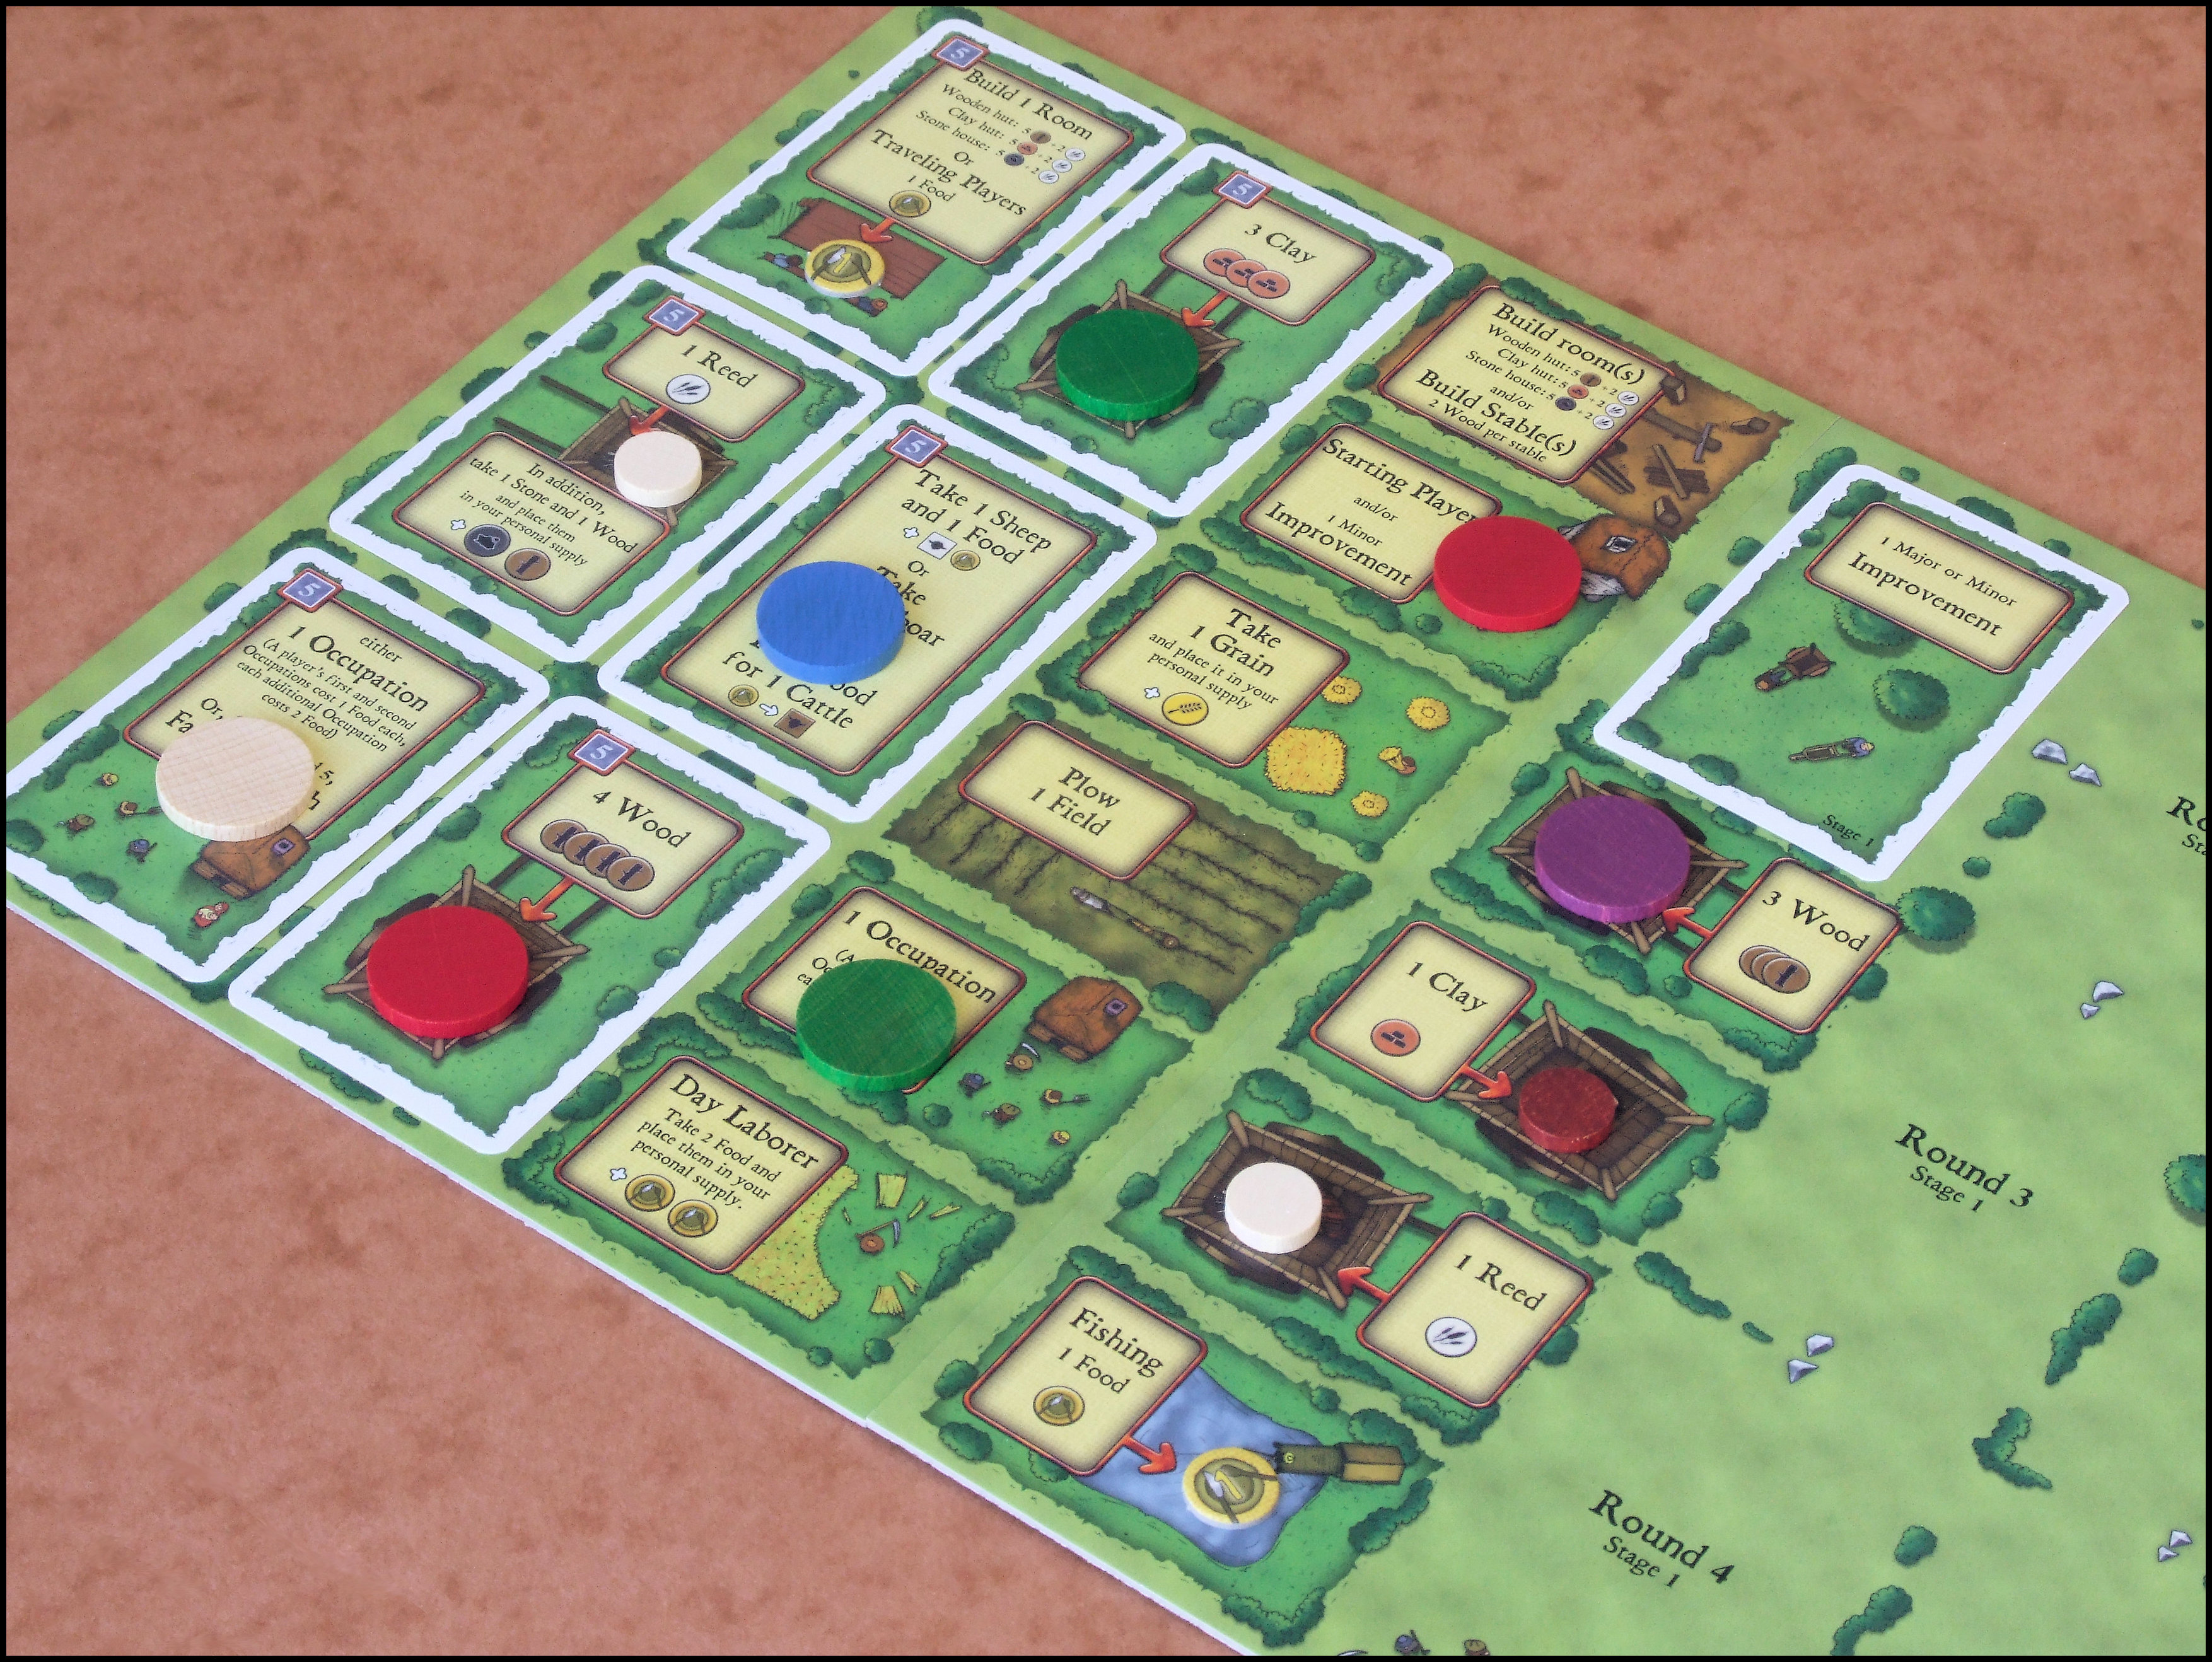 Agricola - 1st Turn 7th Action